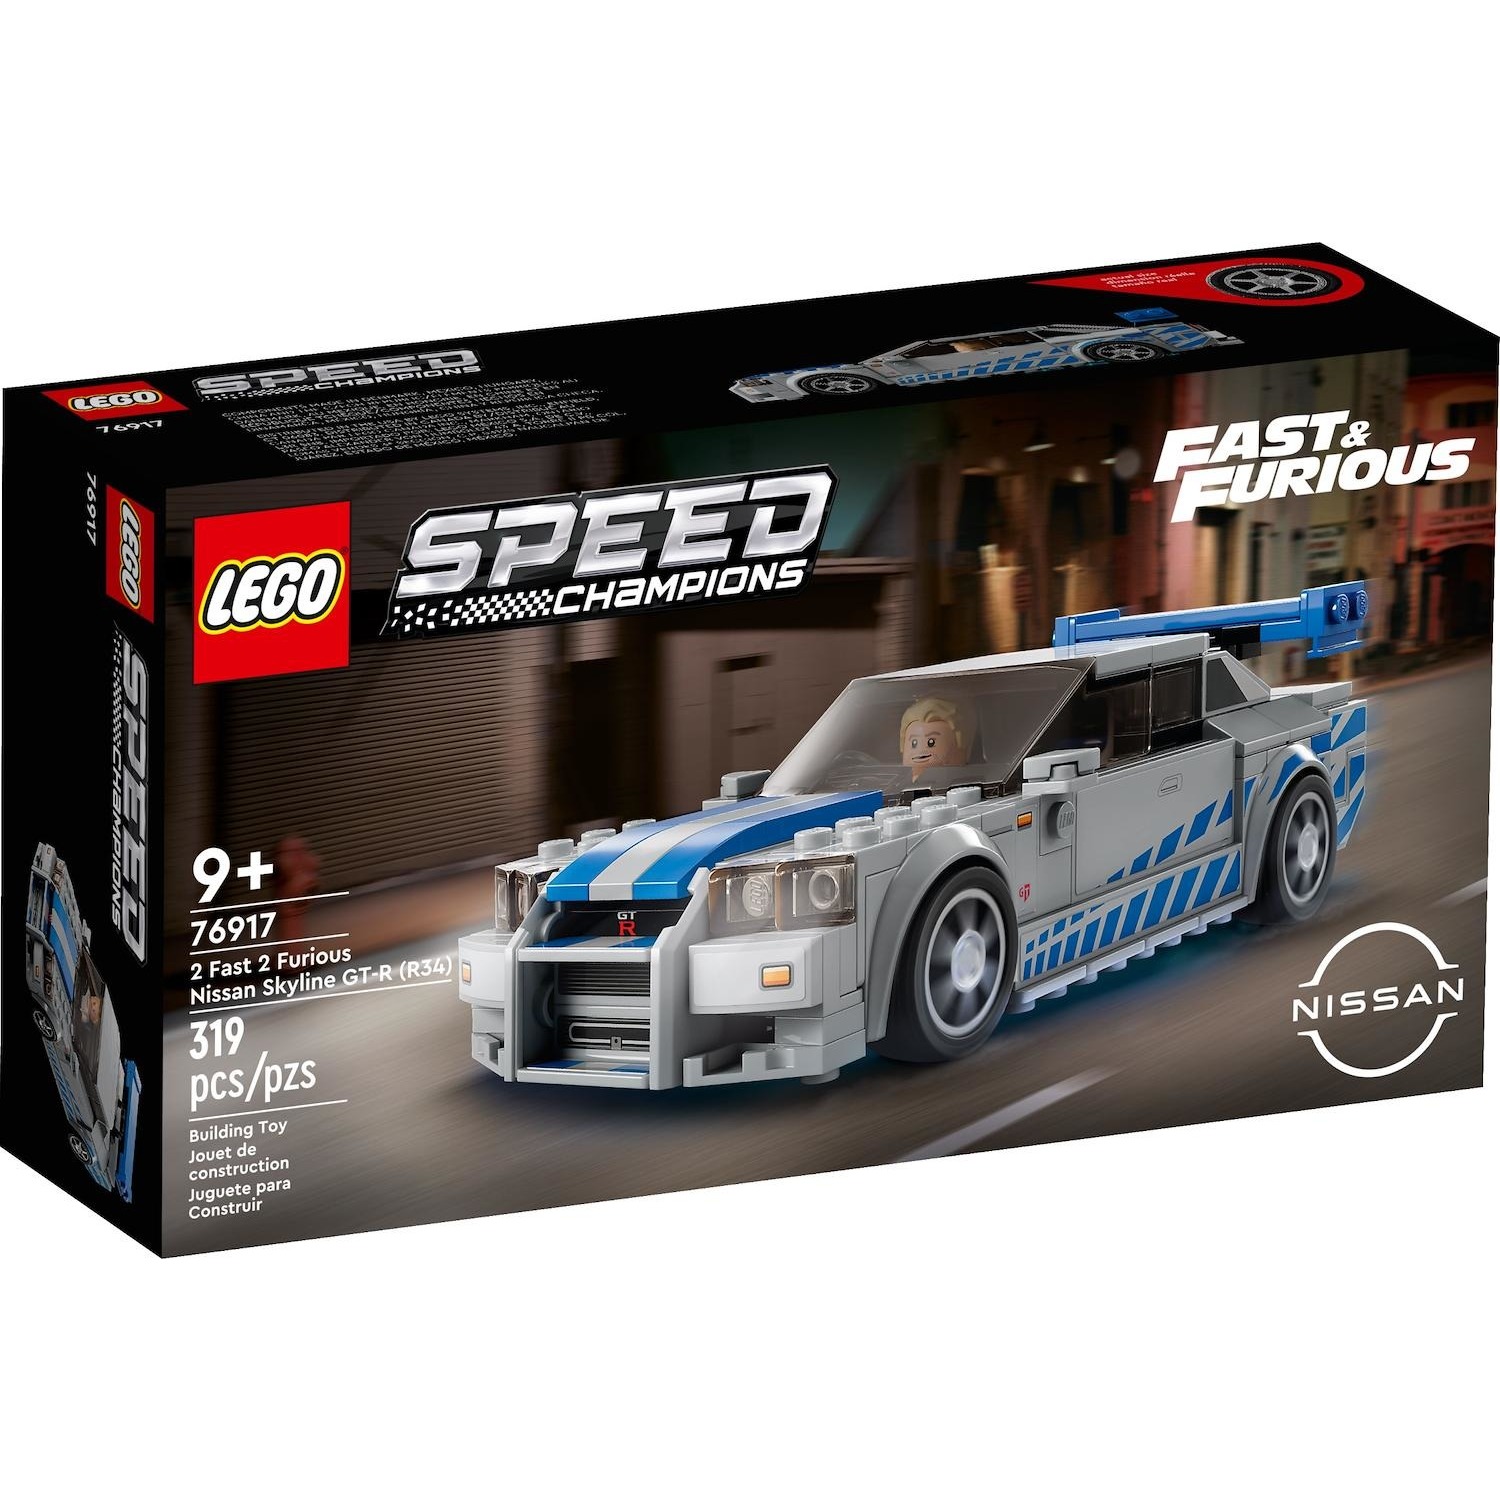 Lego Speed 2 Fast 2 Furious Nissan - DIMOStore